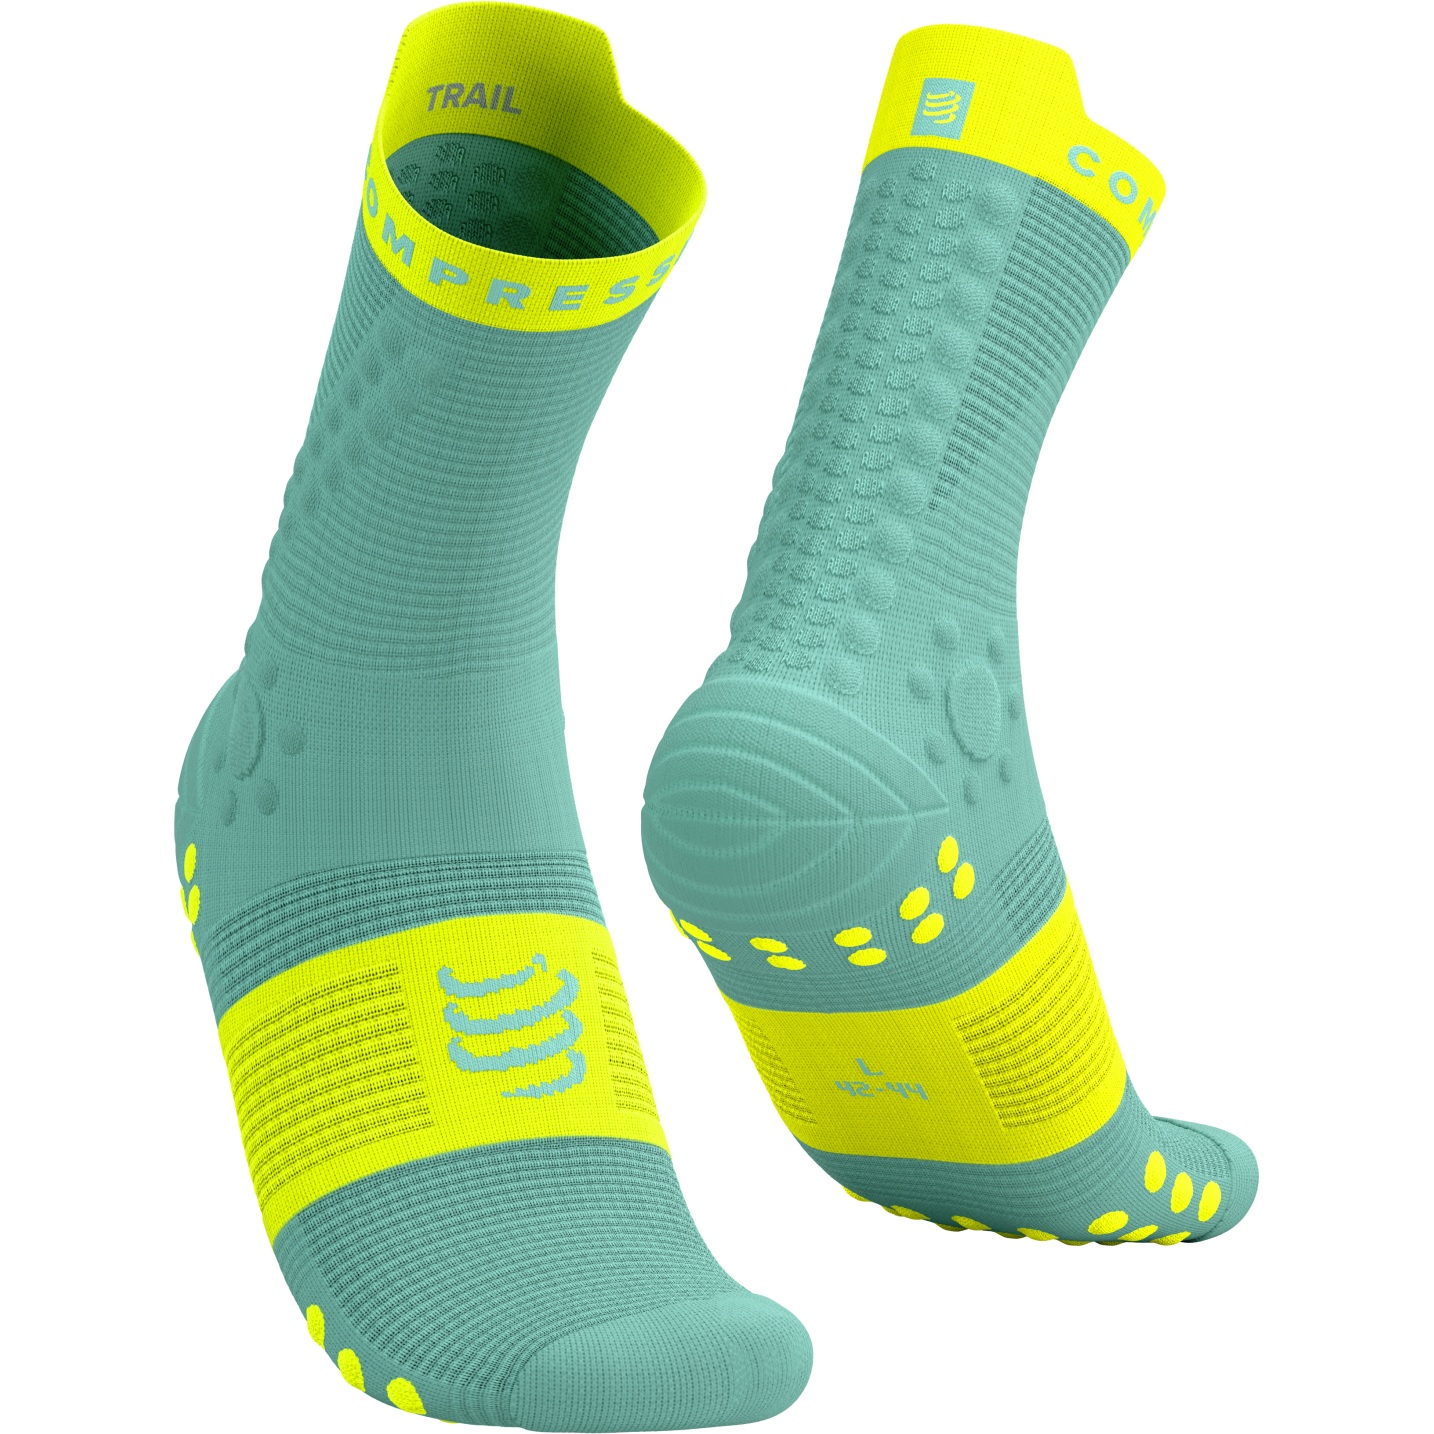 Picture of Compressport Pro Racing Compression Socks v4.0 Trail - eggshell blue/safety yellow